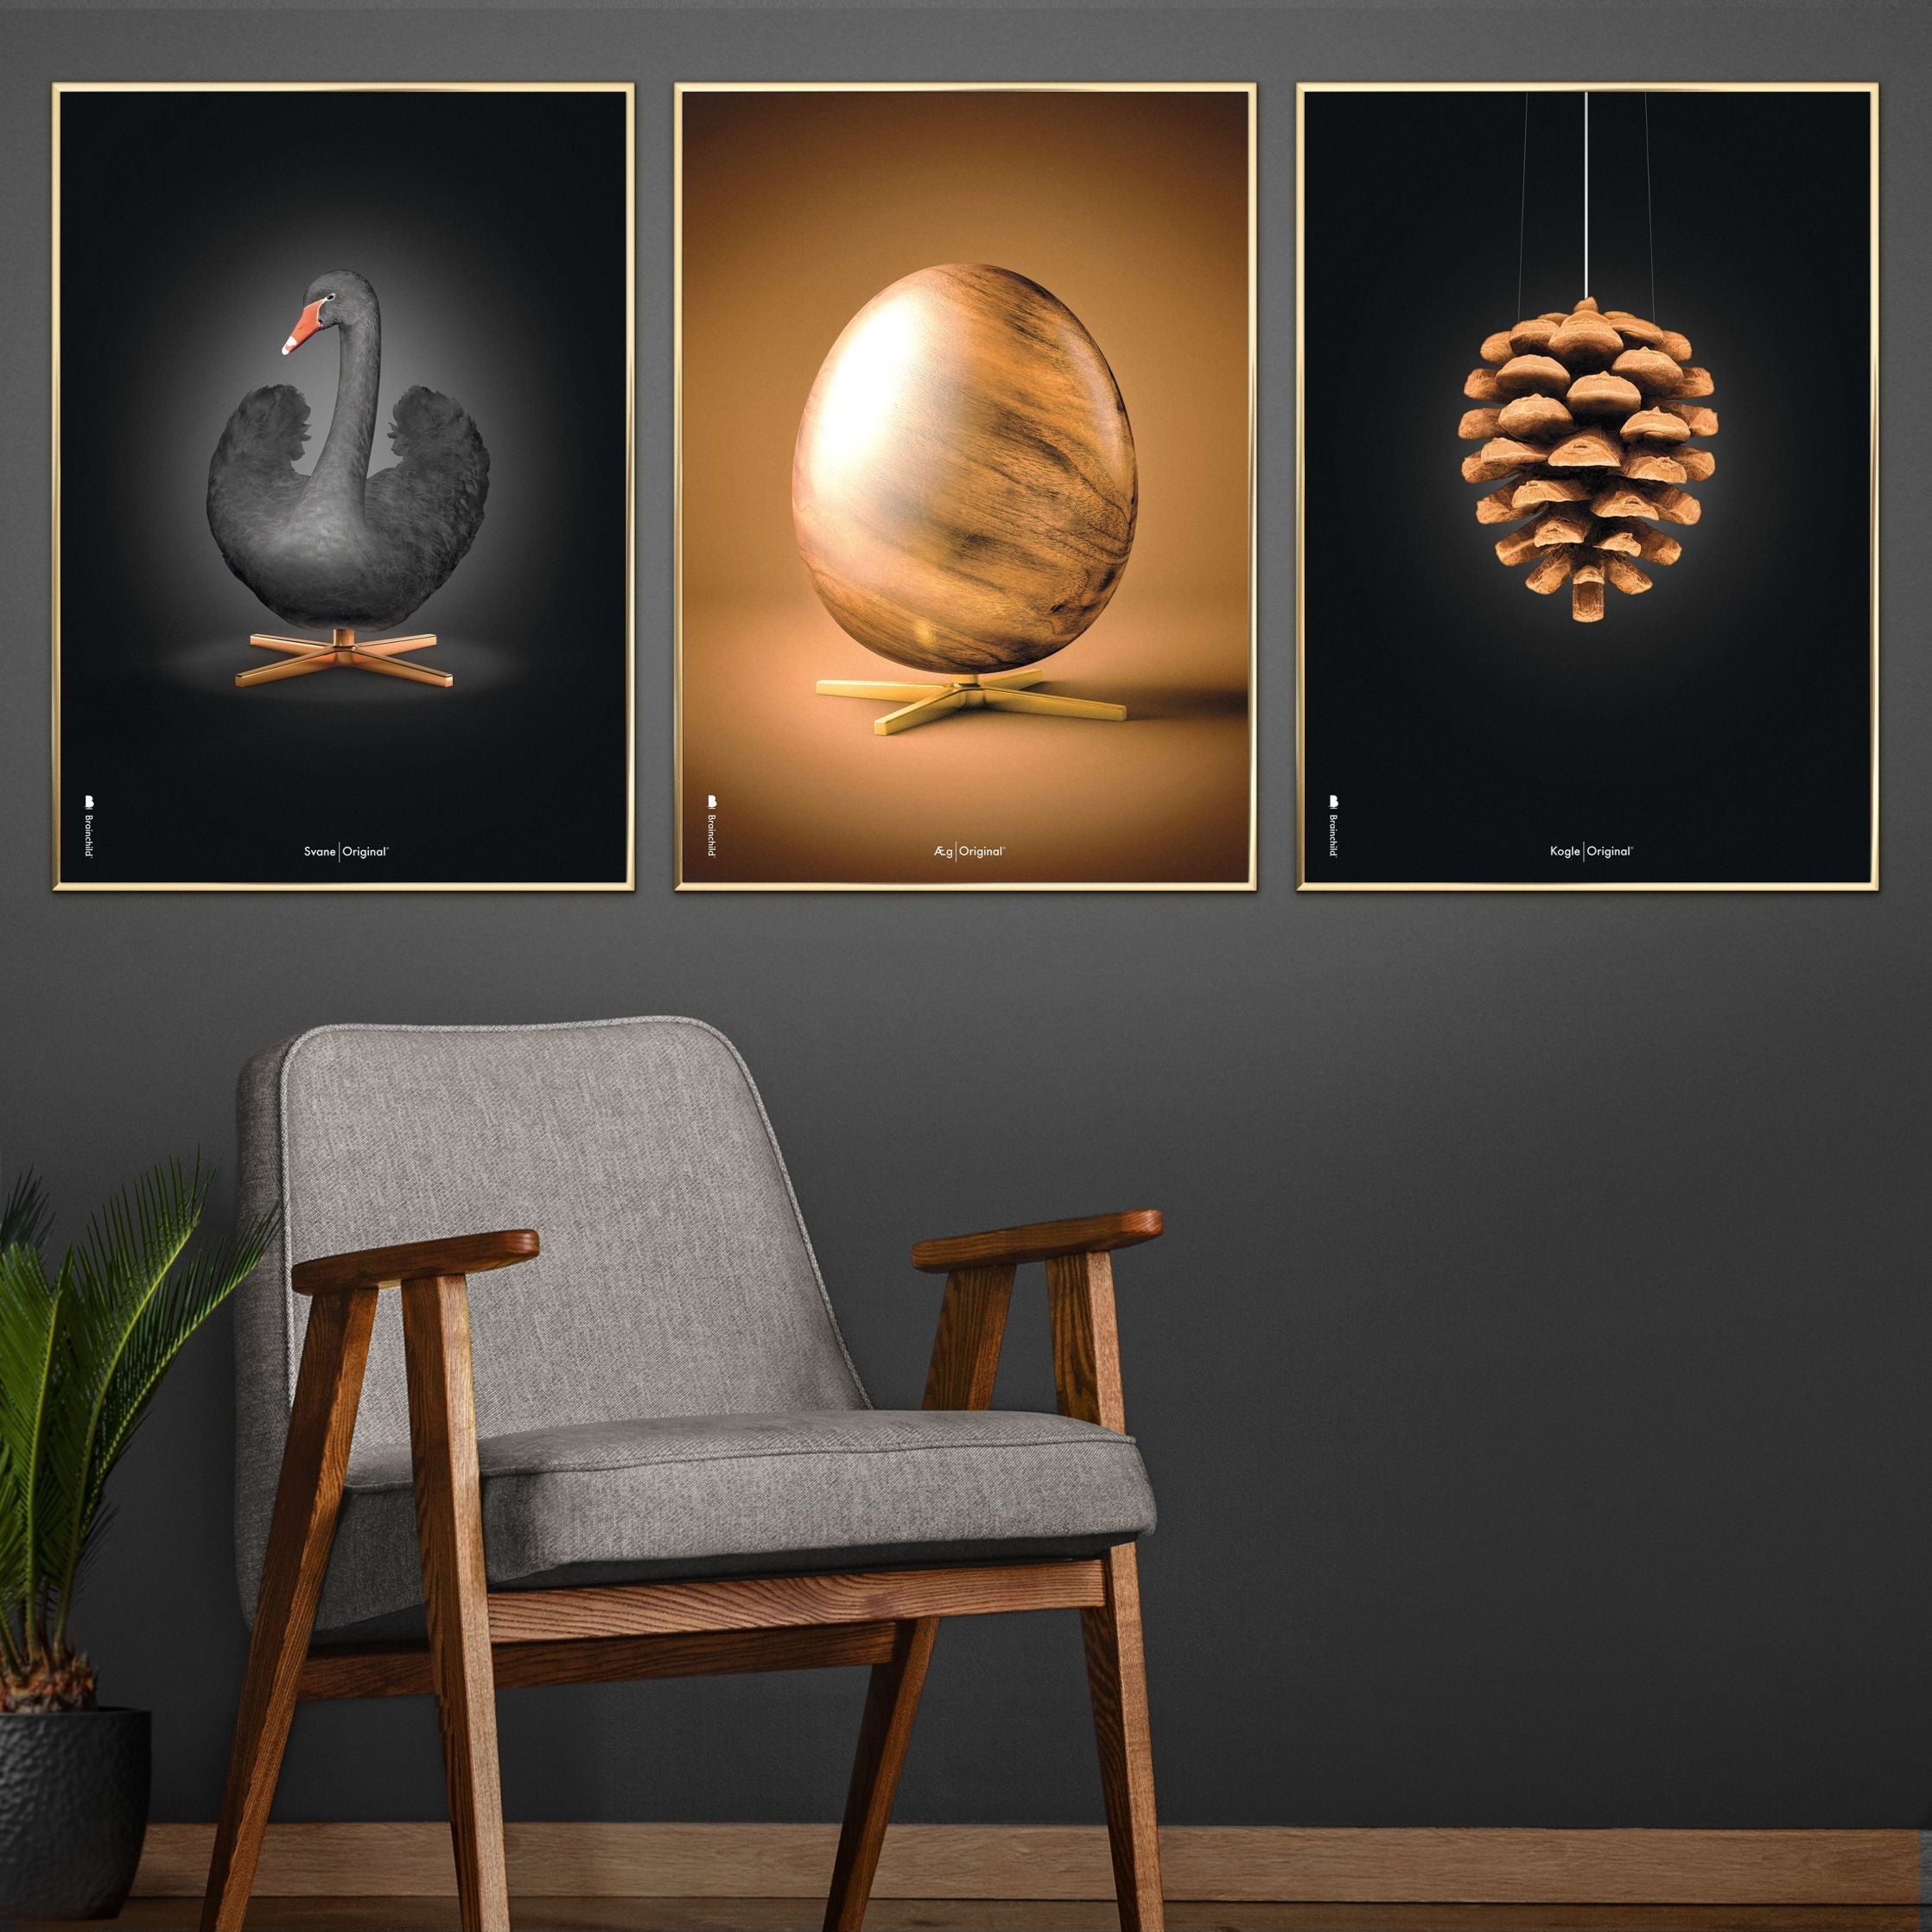 Brainchild Pine Cone Classic Poster, Frame In Black Lacquered Wood 30x40 Cm, Black Background